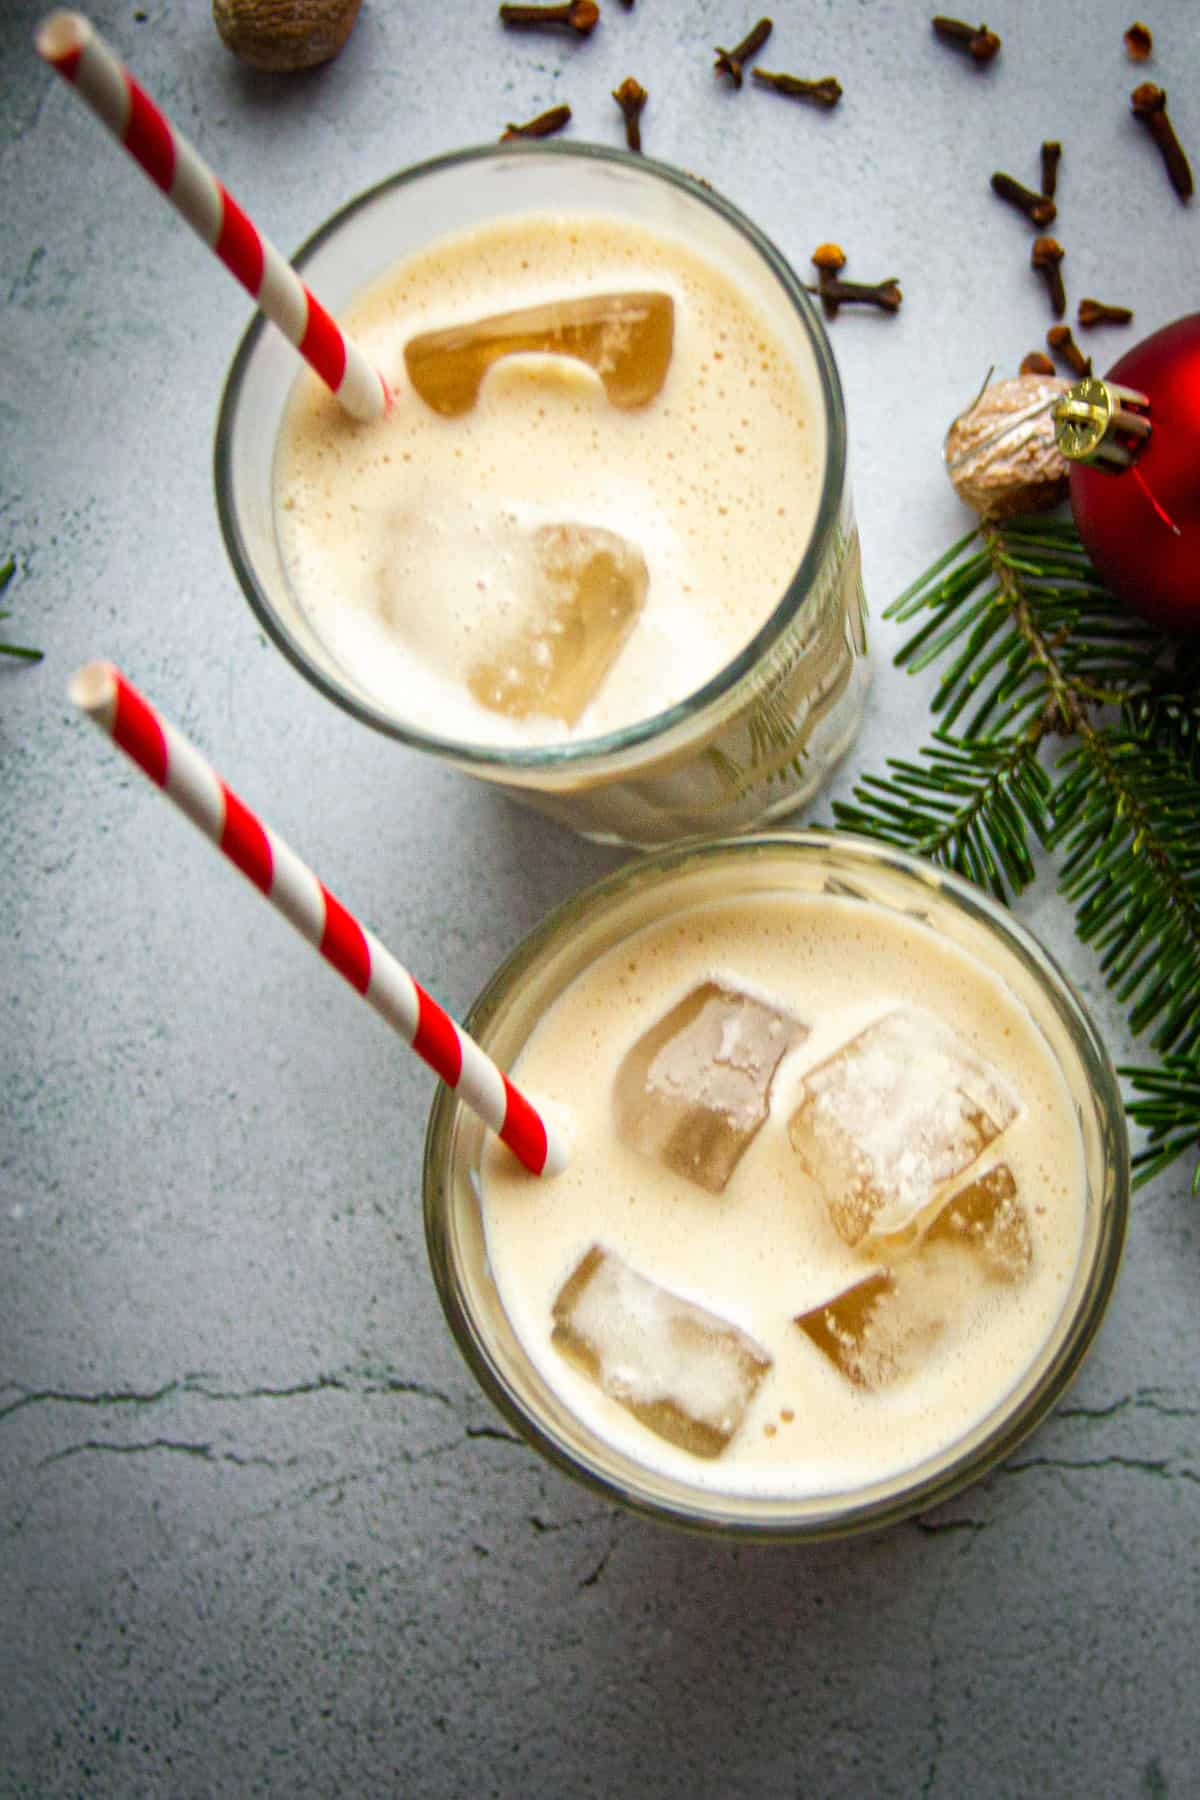 Top down shot of two glasses of oat milk eggnog with striped paper straws.